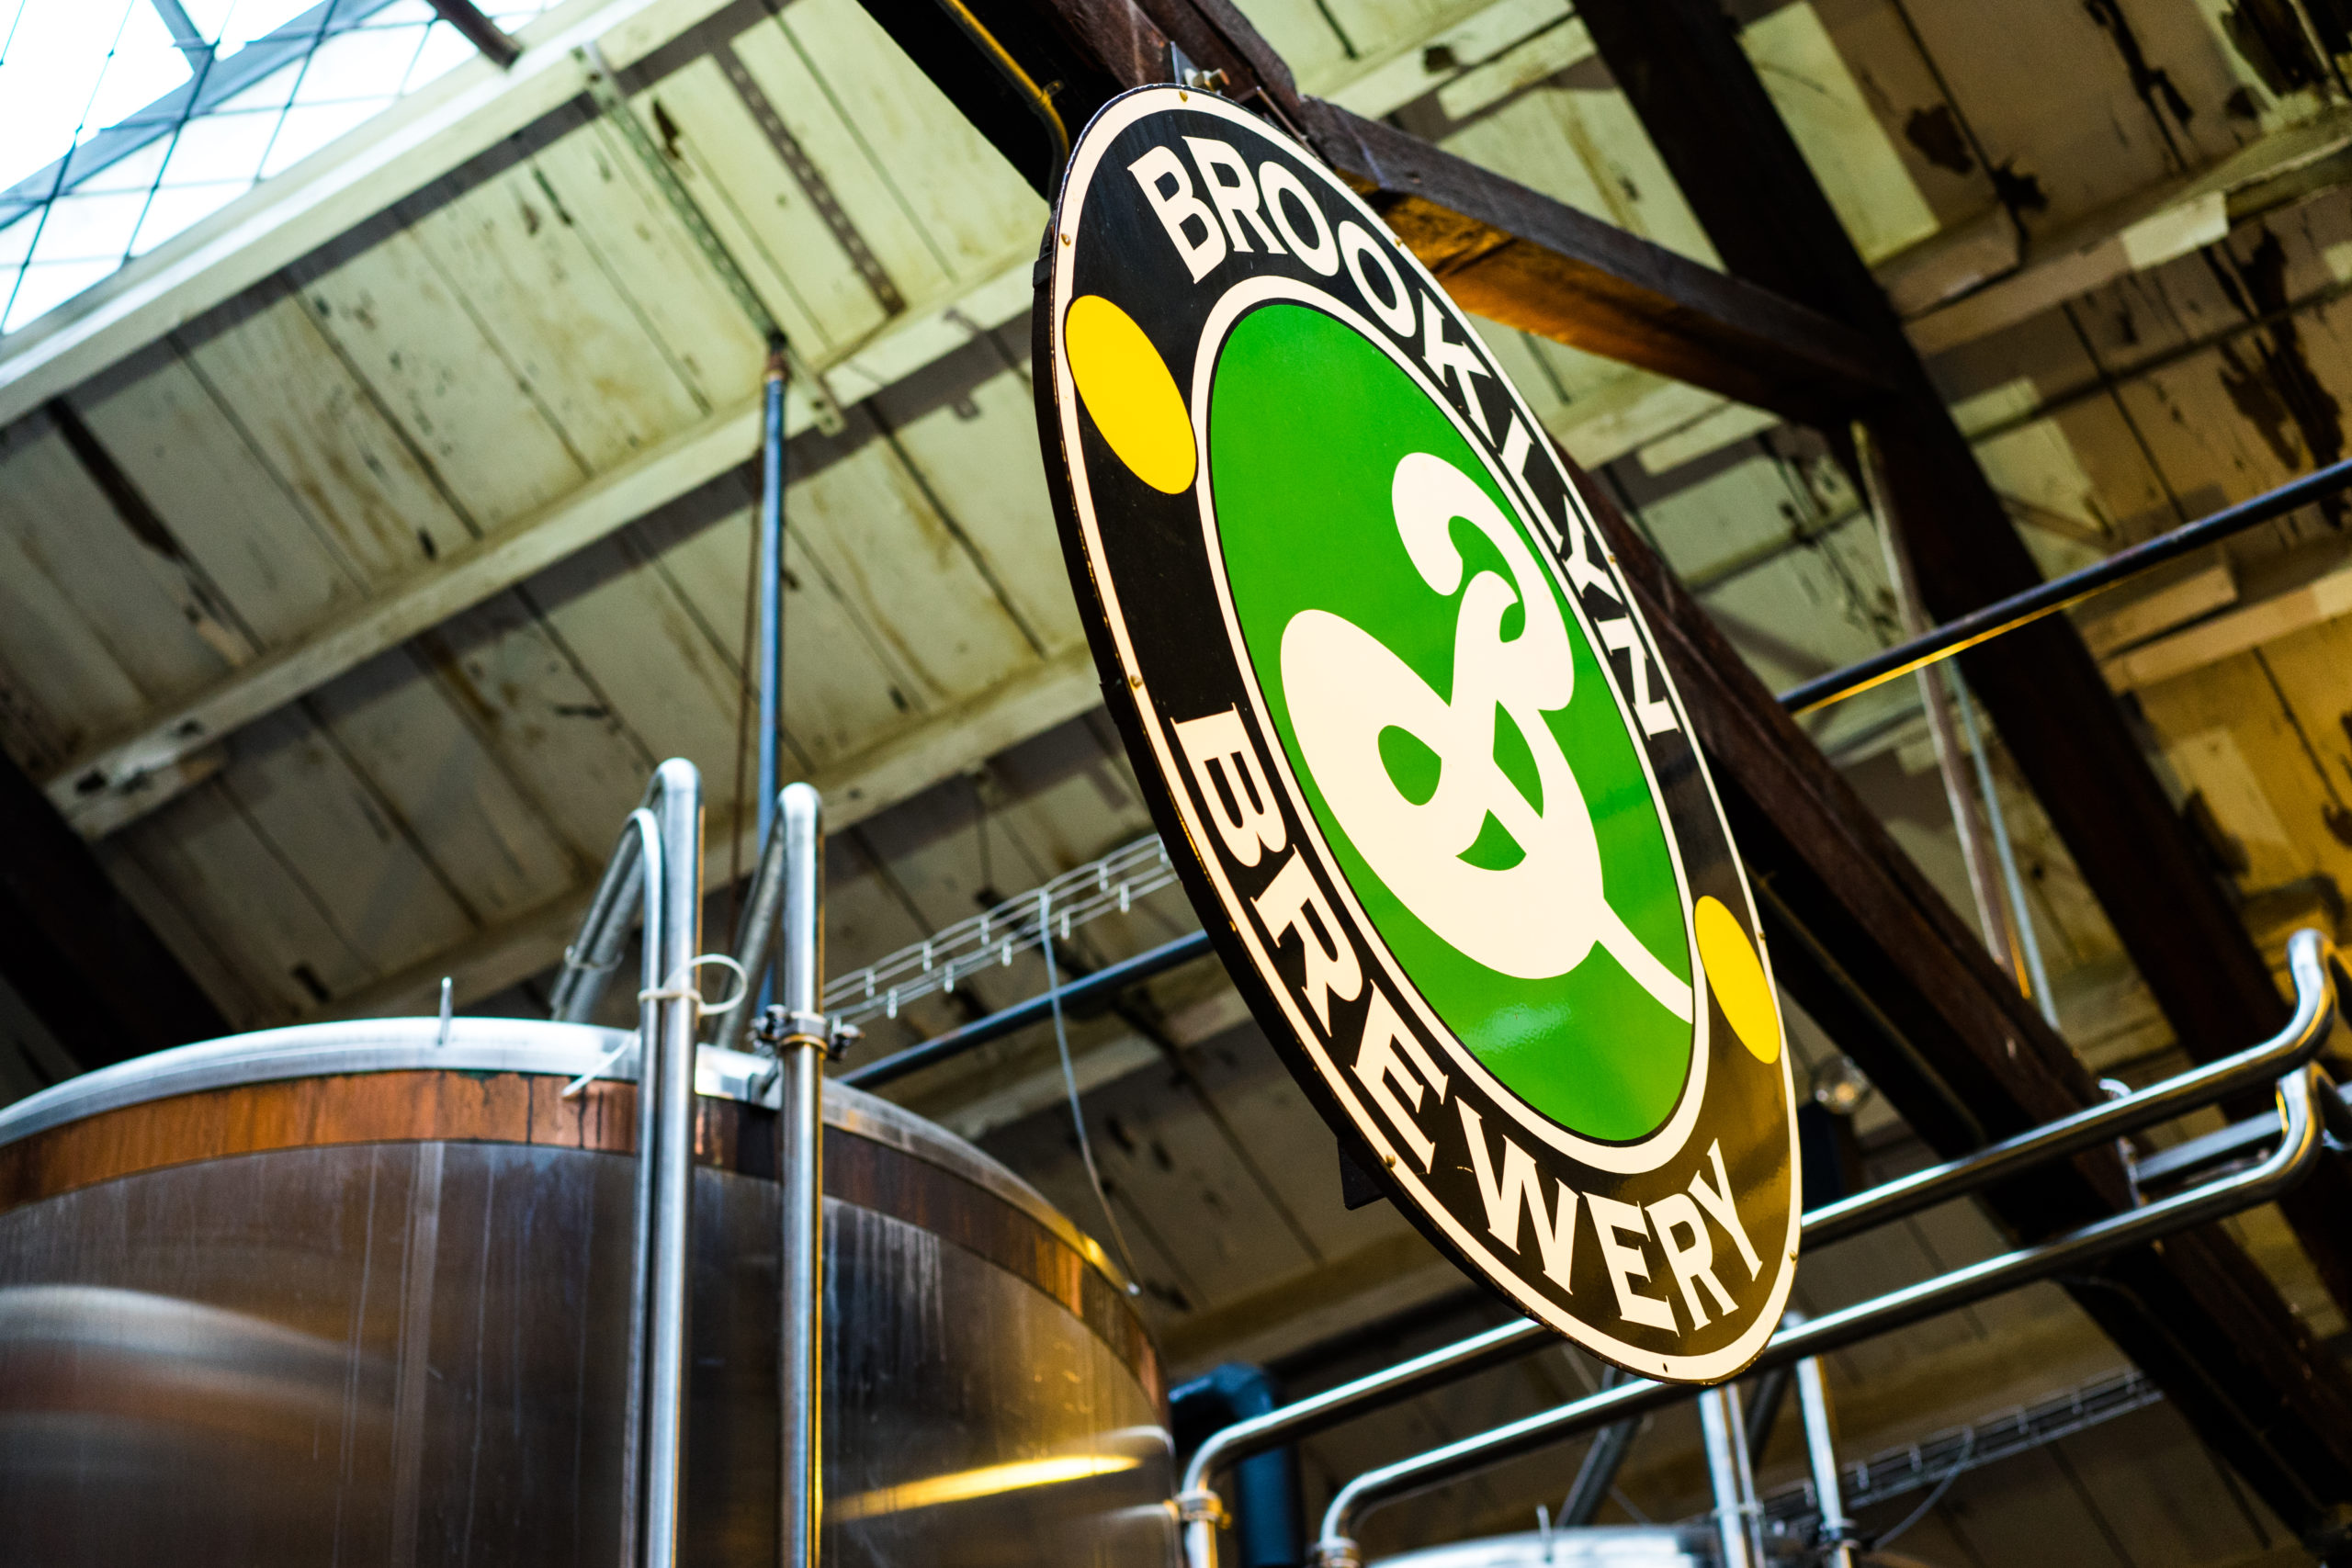 Best Williamsburg Apartments Near Breweries -Best Williamsburg Apartments Near BreweriesThe Brooklyn Brewery sign in black and green over a round brew kettle